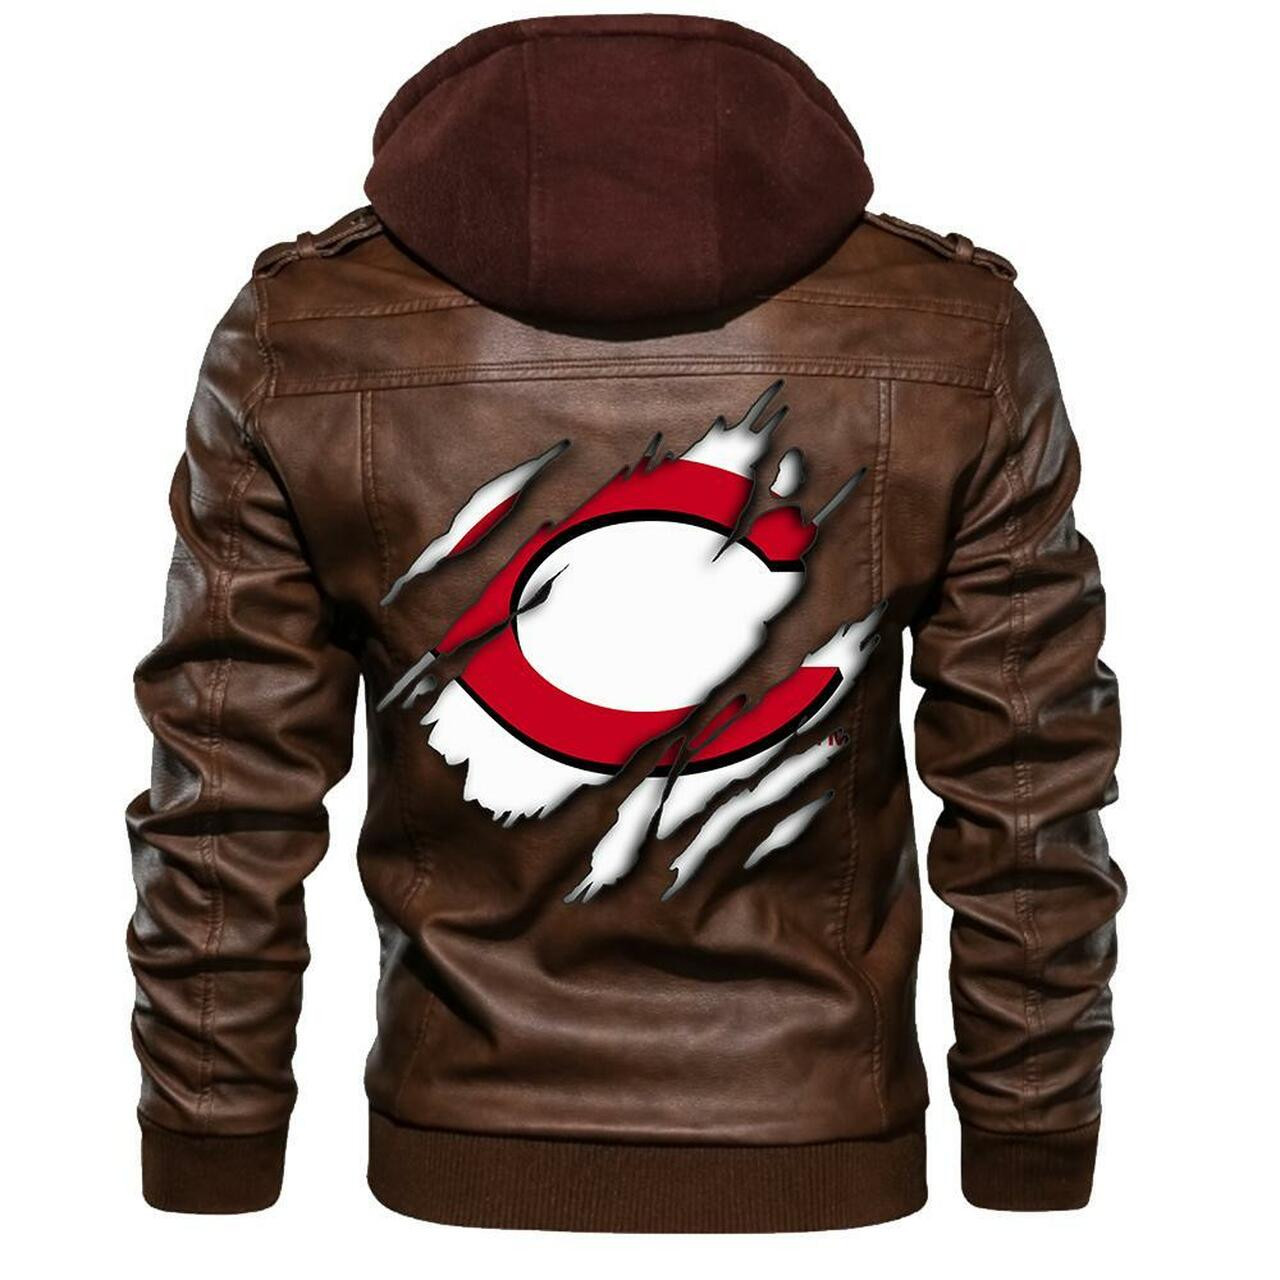 Top 200+ leather jacket so cool for your man 87